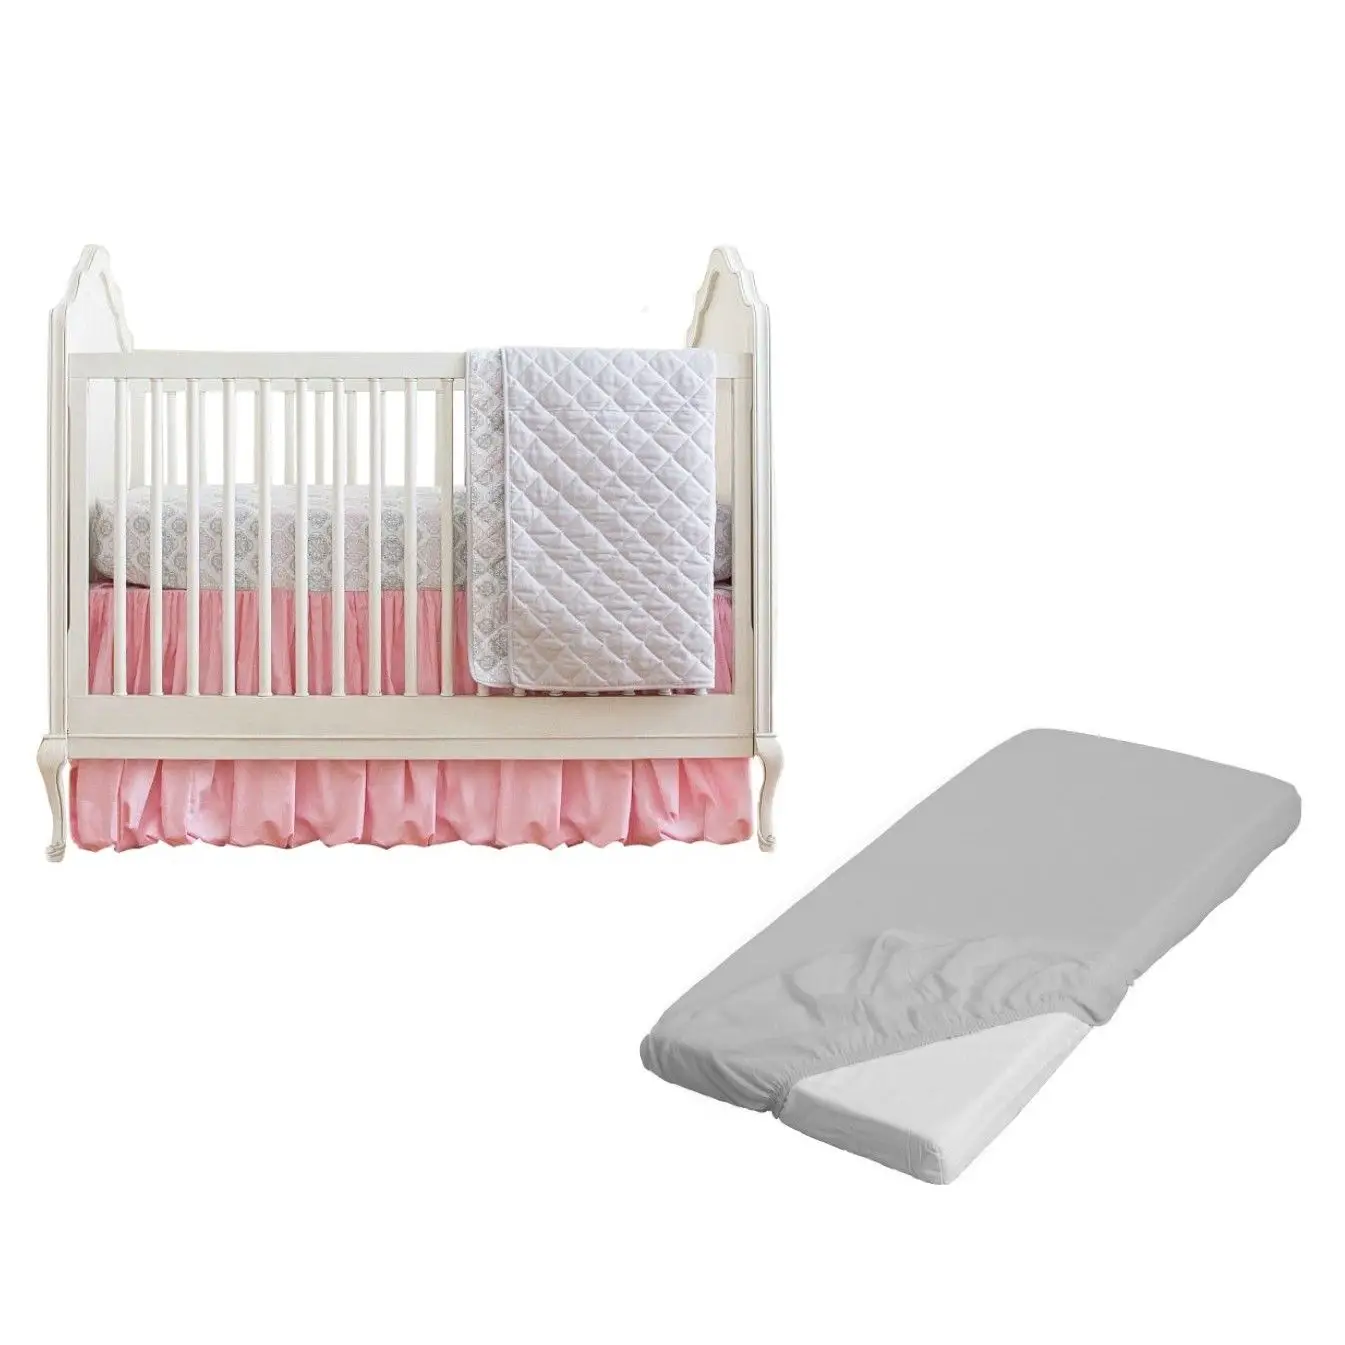 The unique, high quality crib skirt adjusts as you lower the crib ...